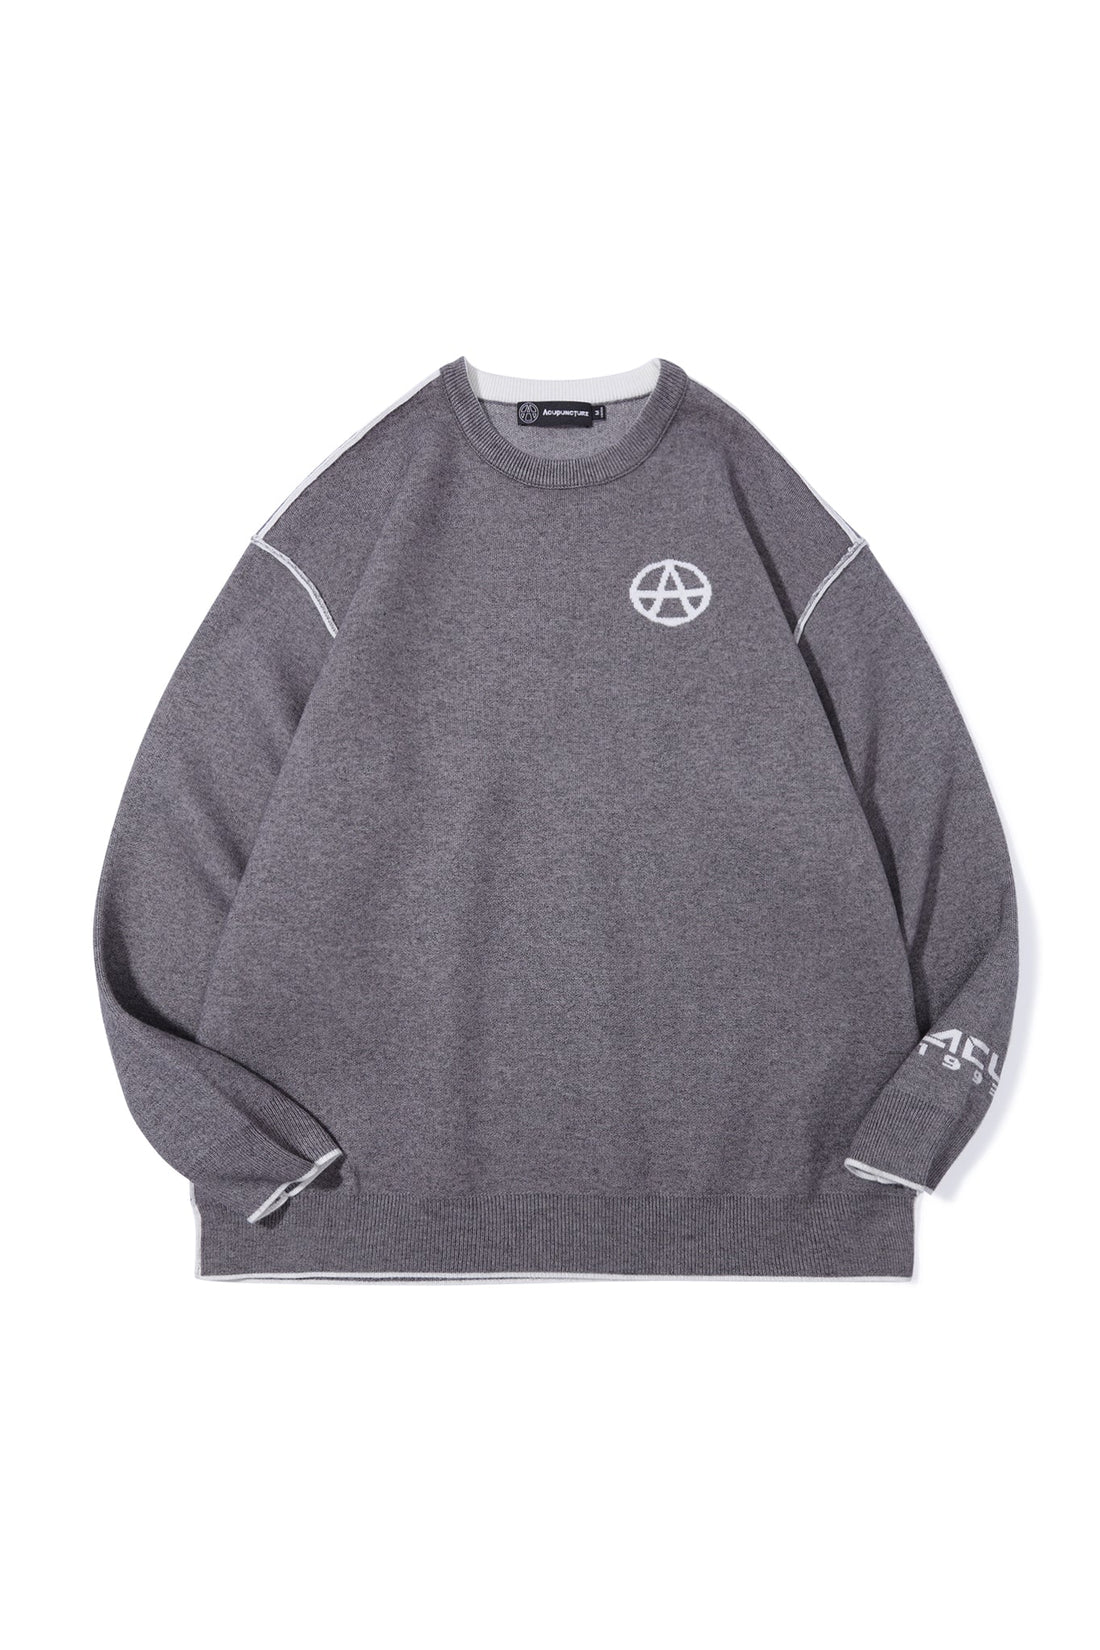 MOTTO SWEATER GREY Acupuncture